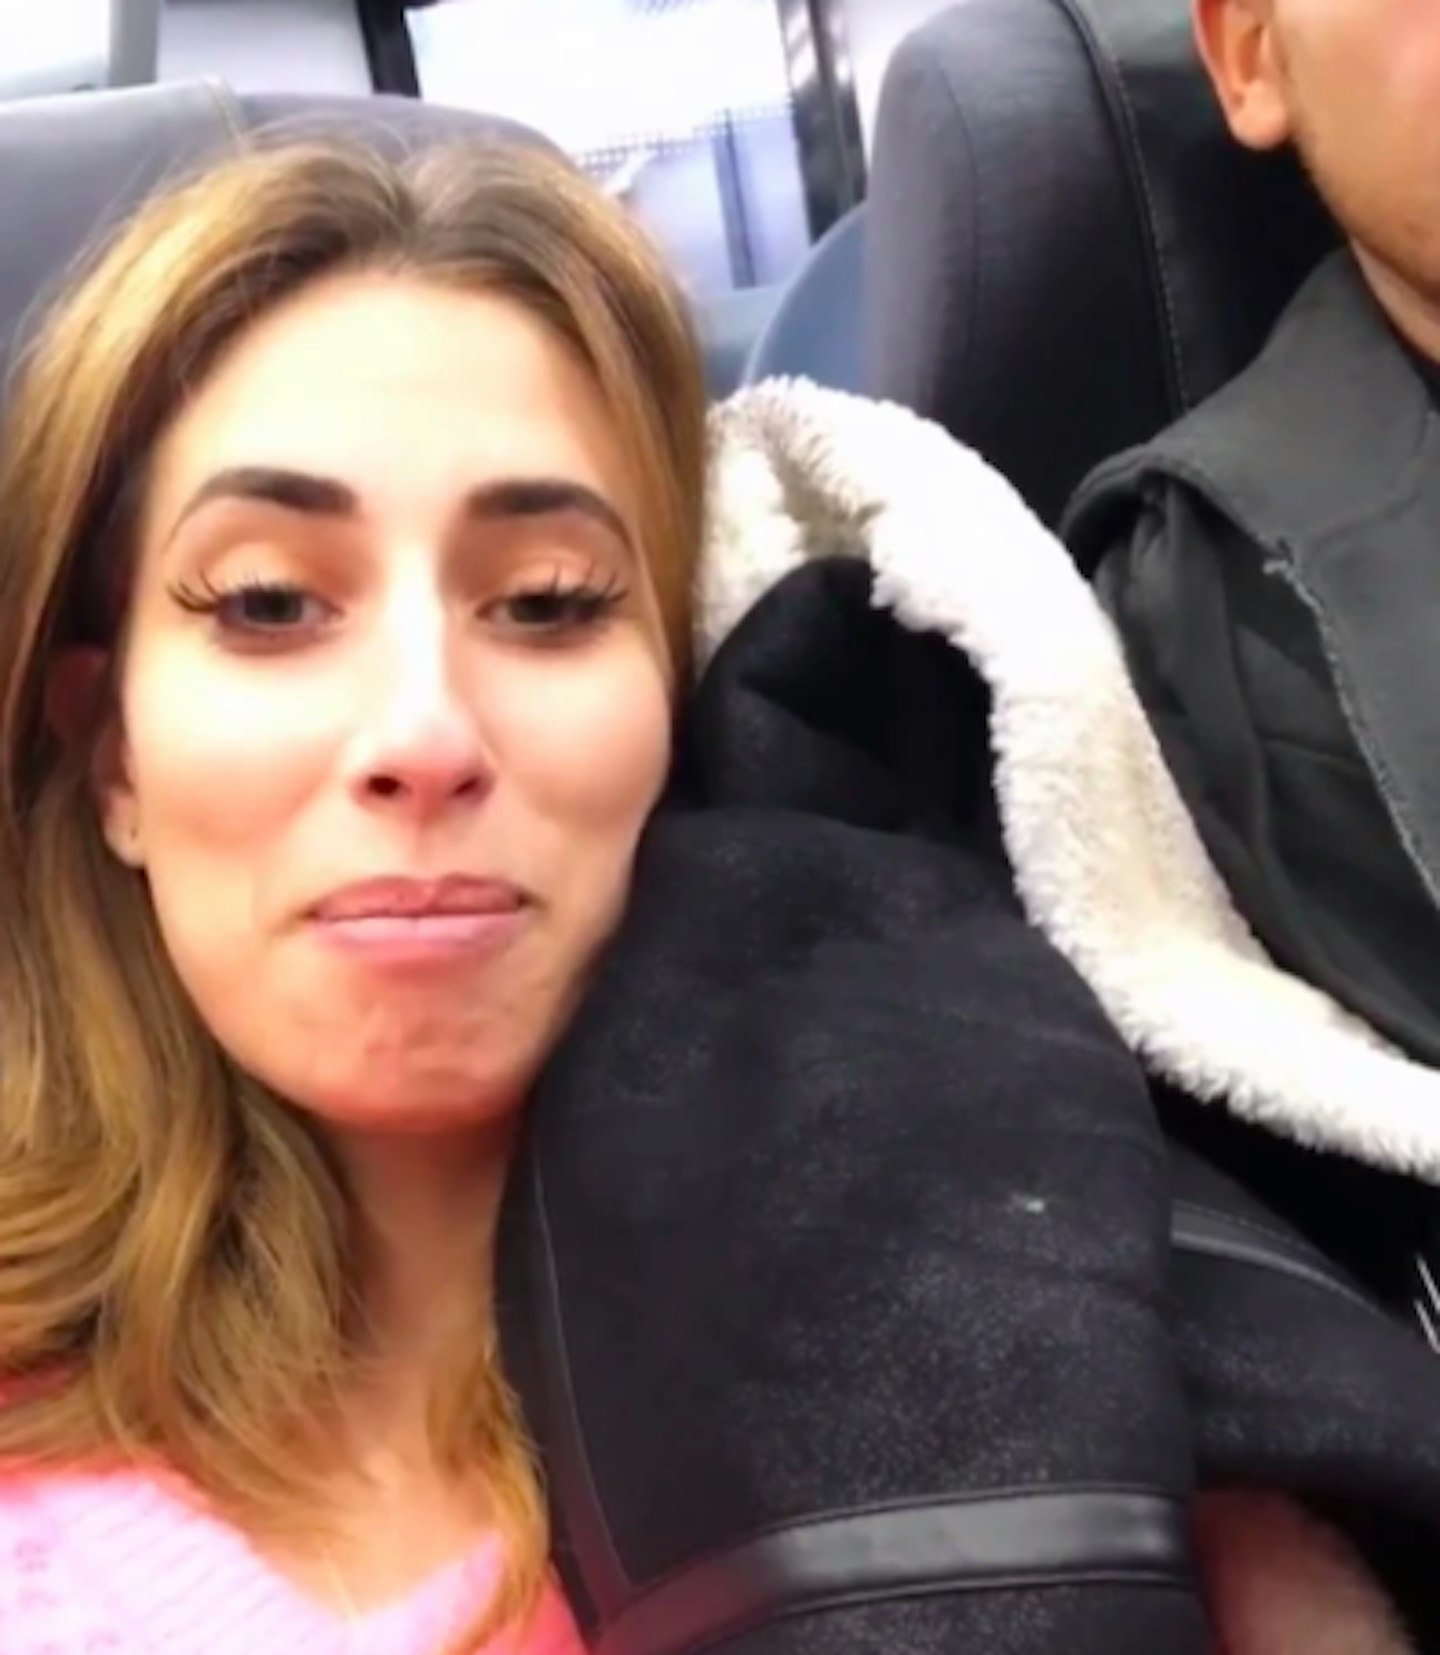 Stacey Solomon and Joe Swash got an early train back home